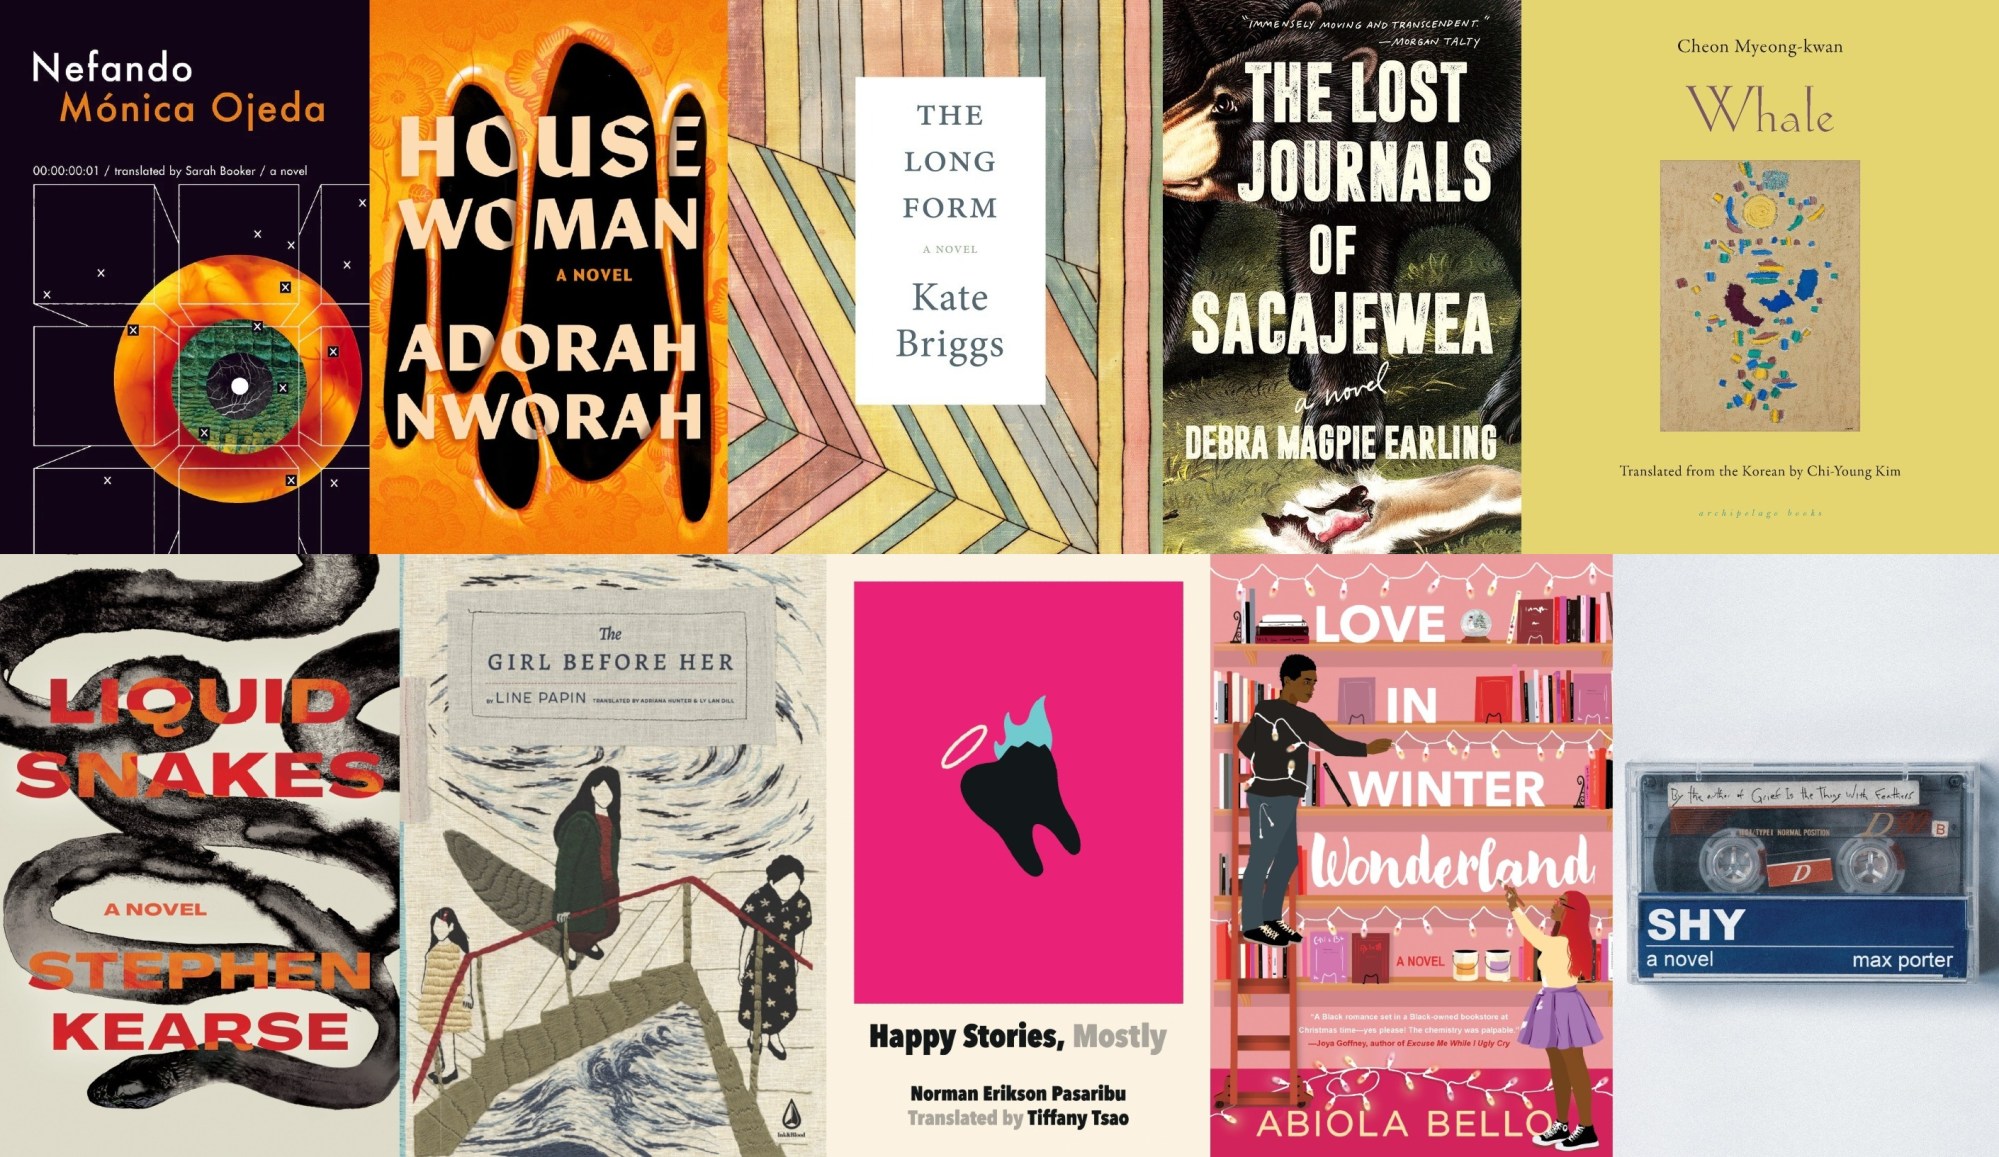 25 must-read books published in 2023 by independent presses.(Courtesy of the publishers: Archipelago Books; Coffee House Press; Dorothy, a publishing project; The Feminist Press; Kaya Press; Graywolf Press; Hub City Press; Milkweed Press; Soft Skull Press; Soho Press; Unnamed Press)